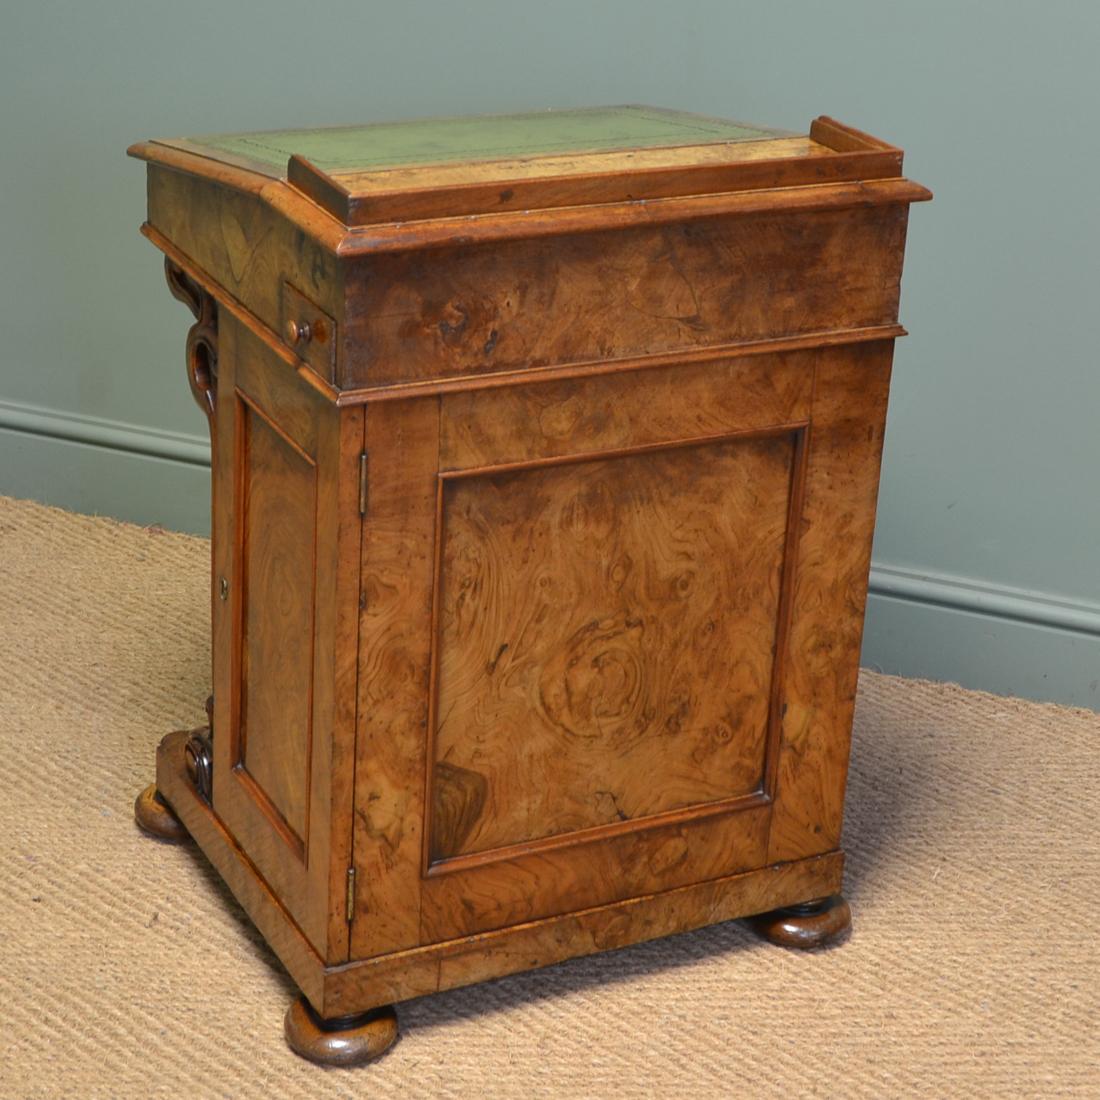 Spectacular quality Victorian figured walnut antique Davenport

This spectacular Davenport circa 1860 has a moulded fall front with green tooled leather writing insert, the interior is in a striking birch with three small mahogany lined drawers